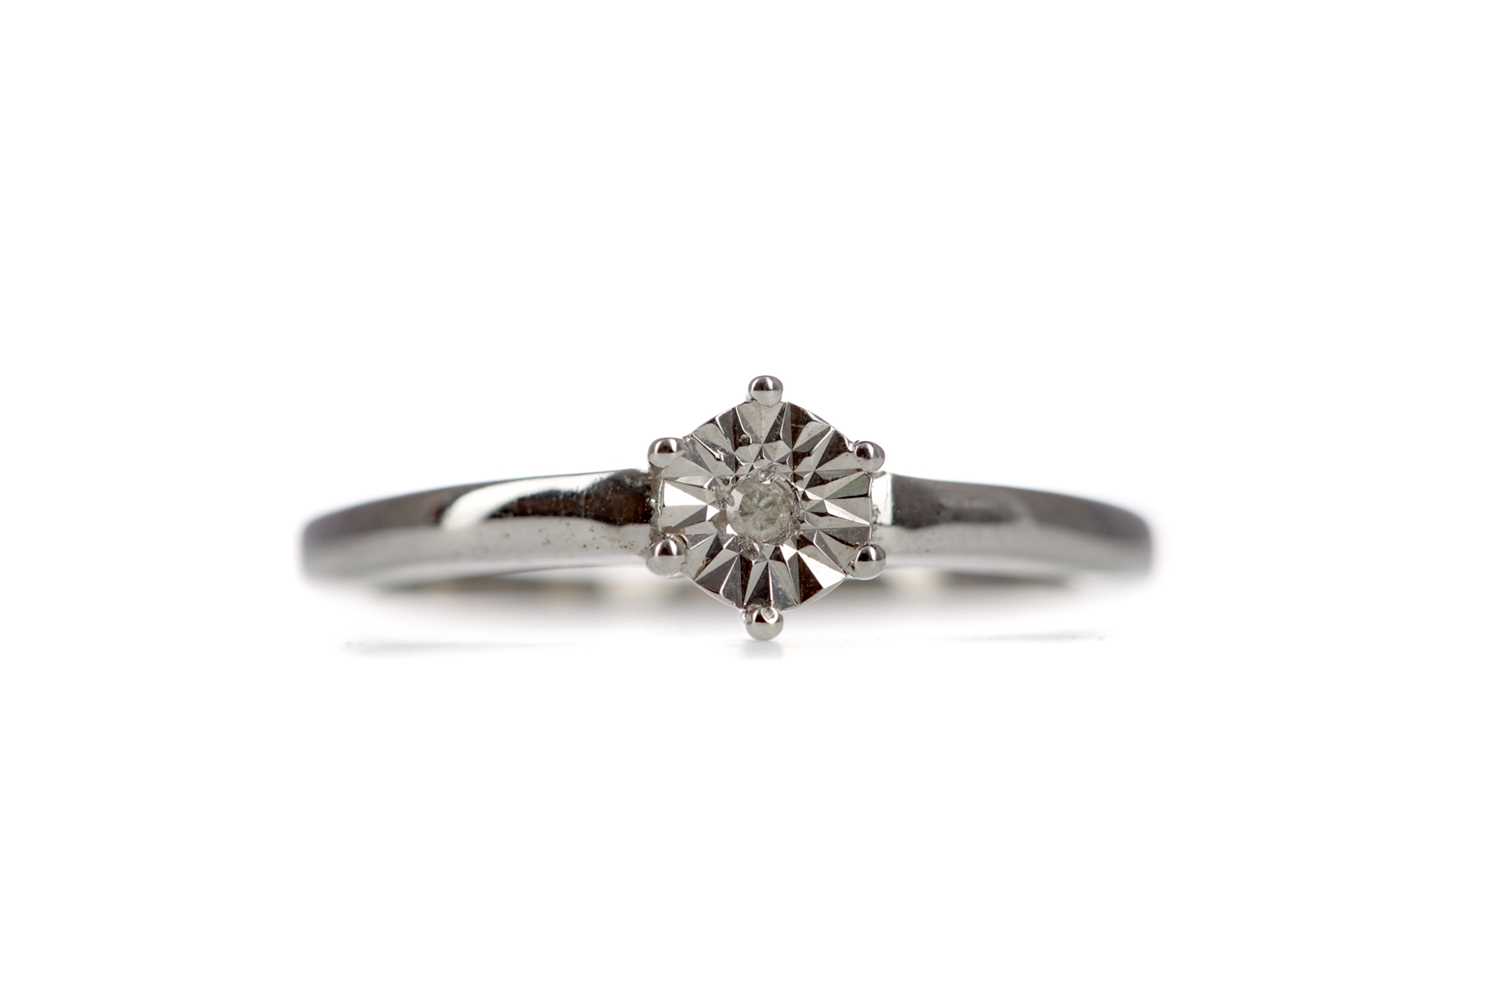 Lot 1398 - A DIAMOND SOLITAIRE RING